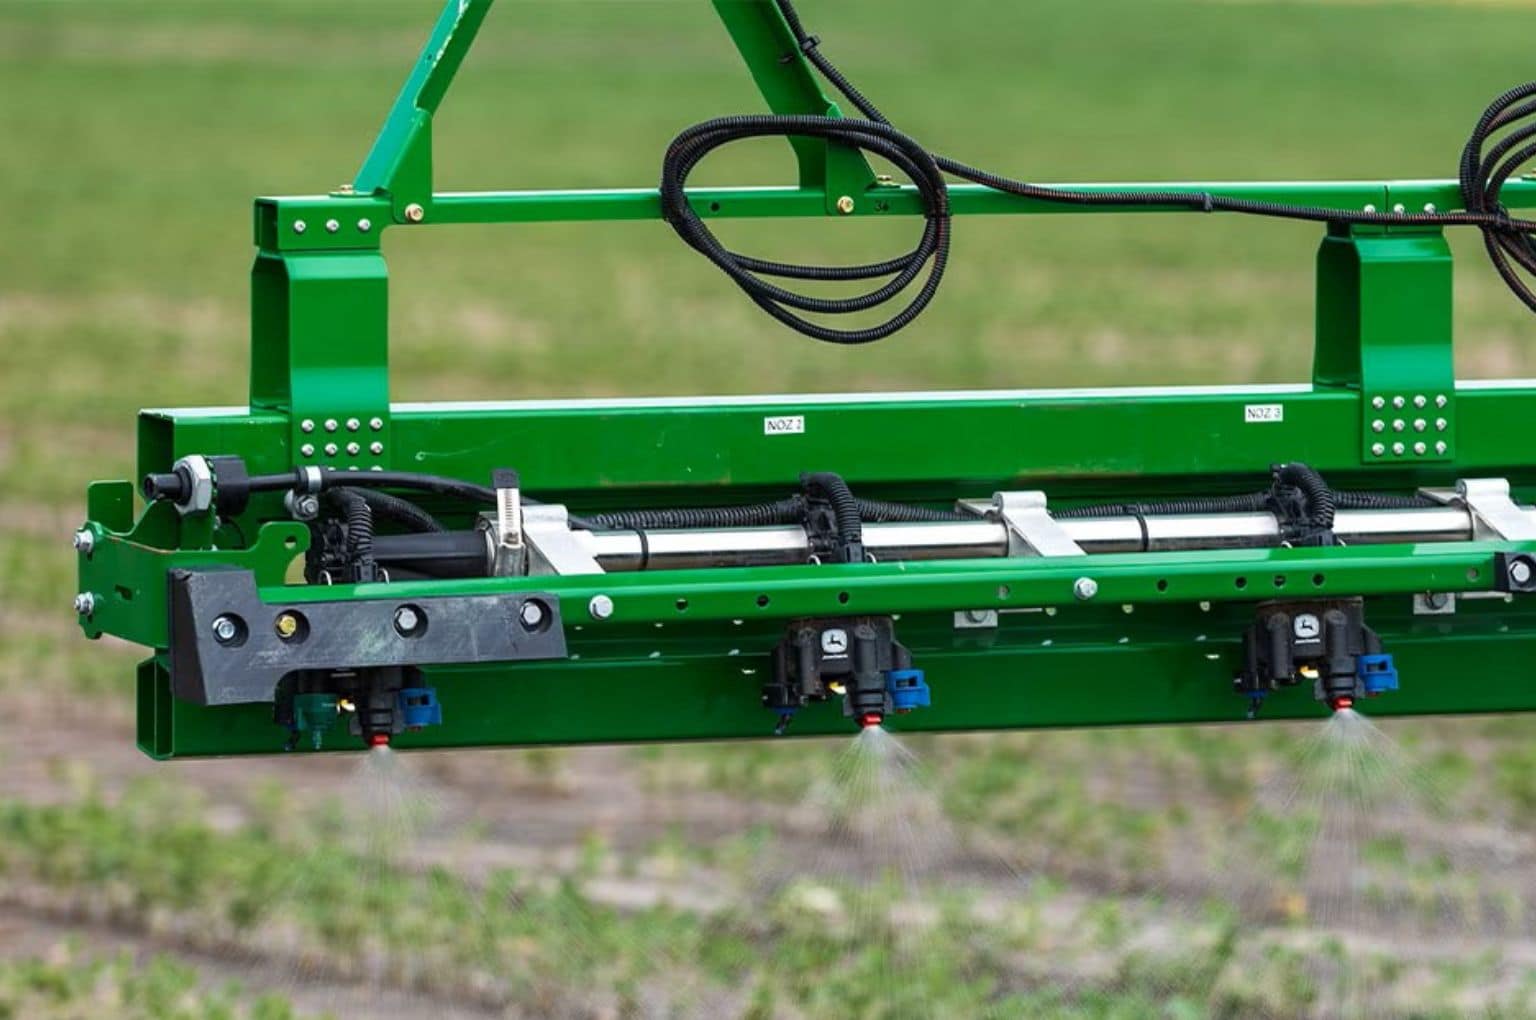 John Deere has introduced a new See & Spray Premium performance upgrade kit for John Deere self-propelled sprayers in the US, the next addition in the See & Spray lineup